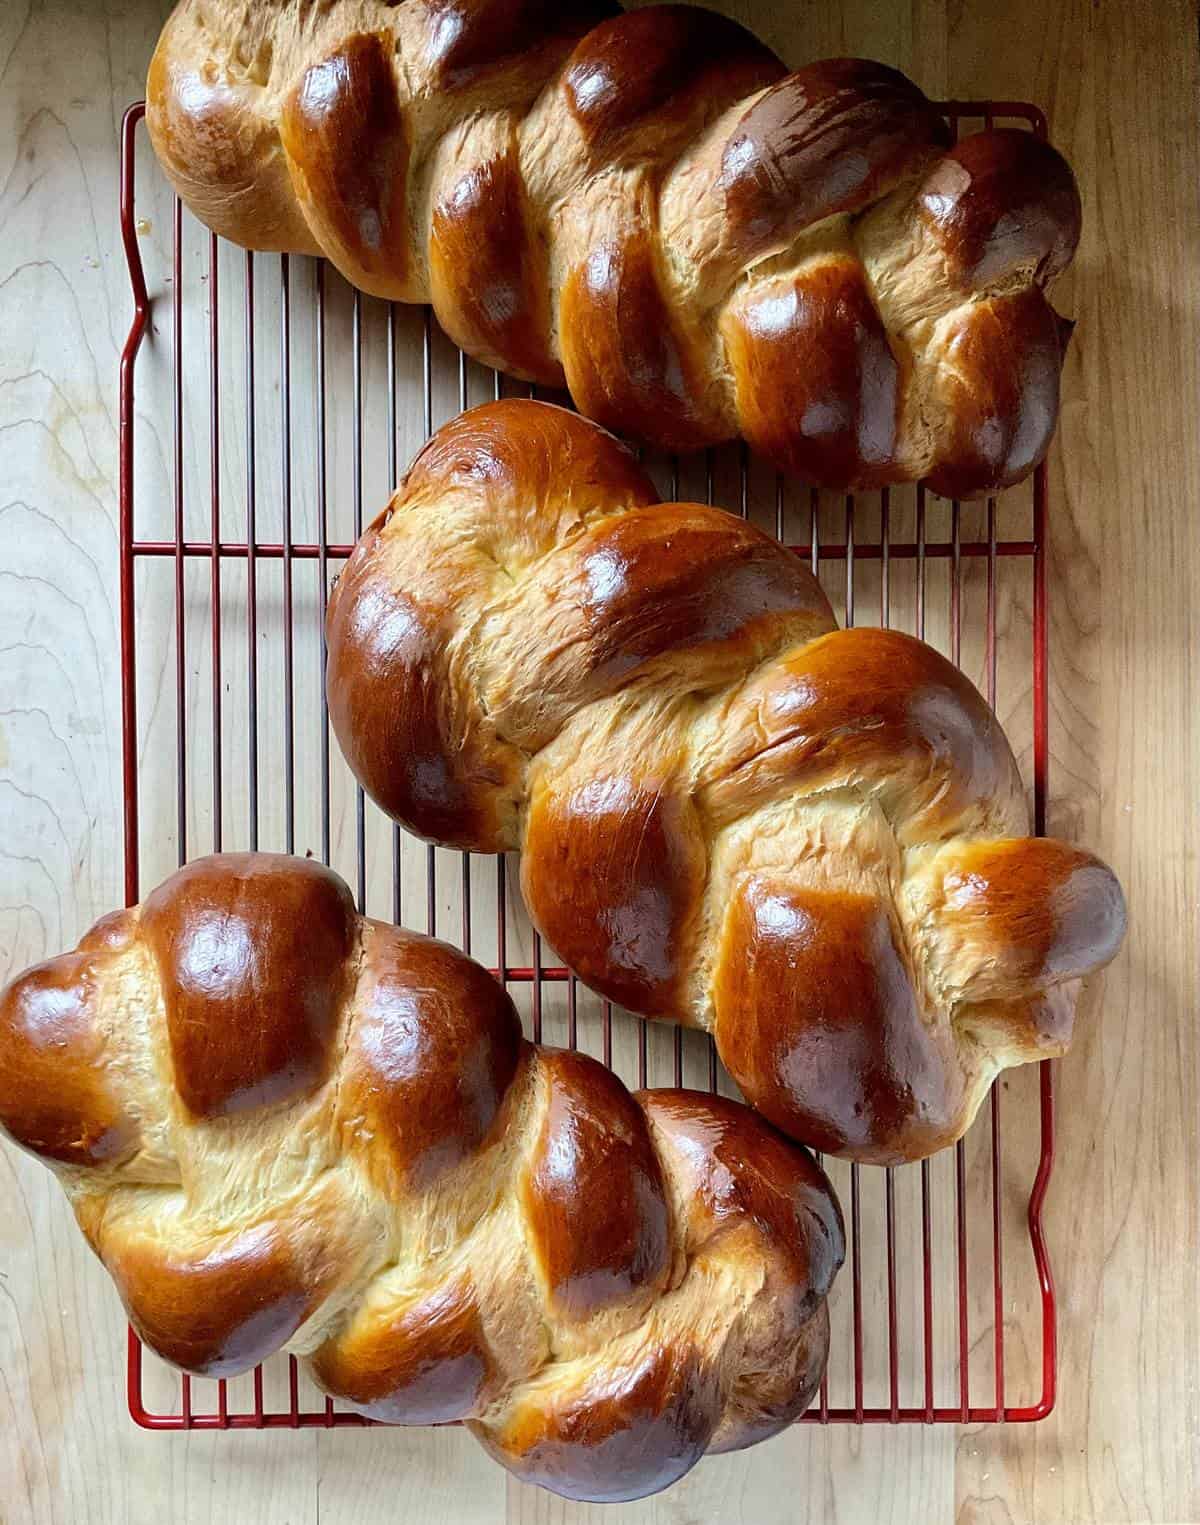 The golden color of the crust of the three braided Italian Easter bread.